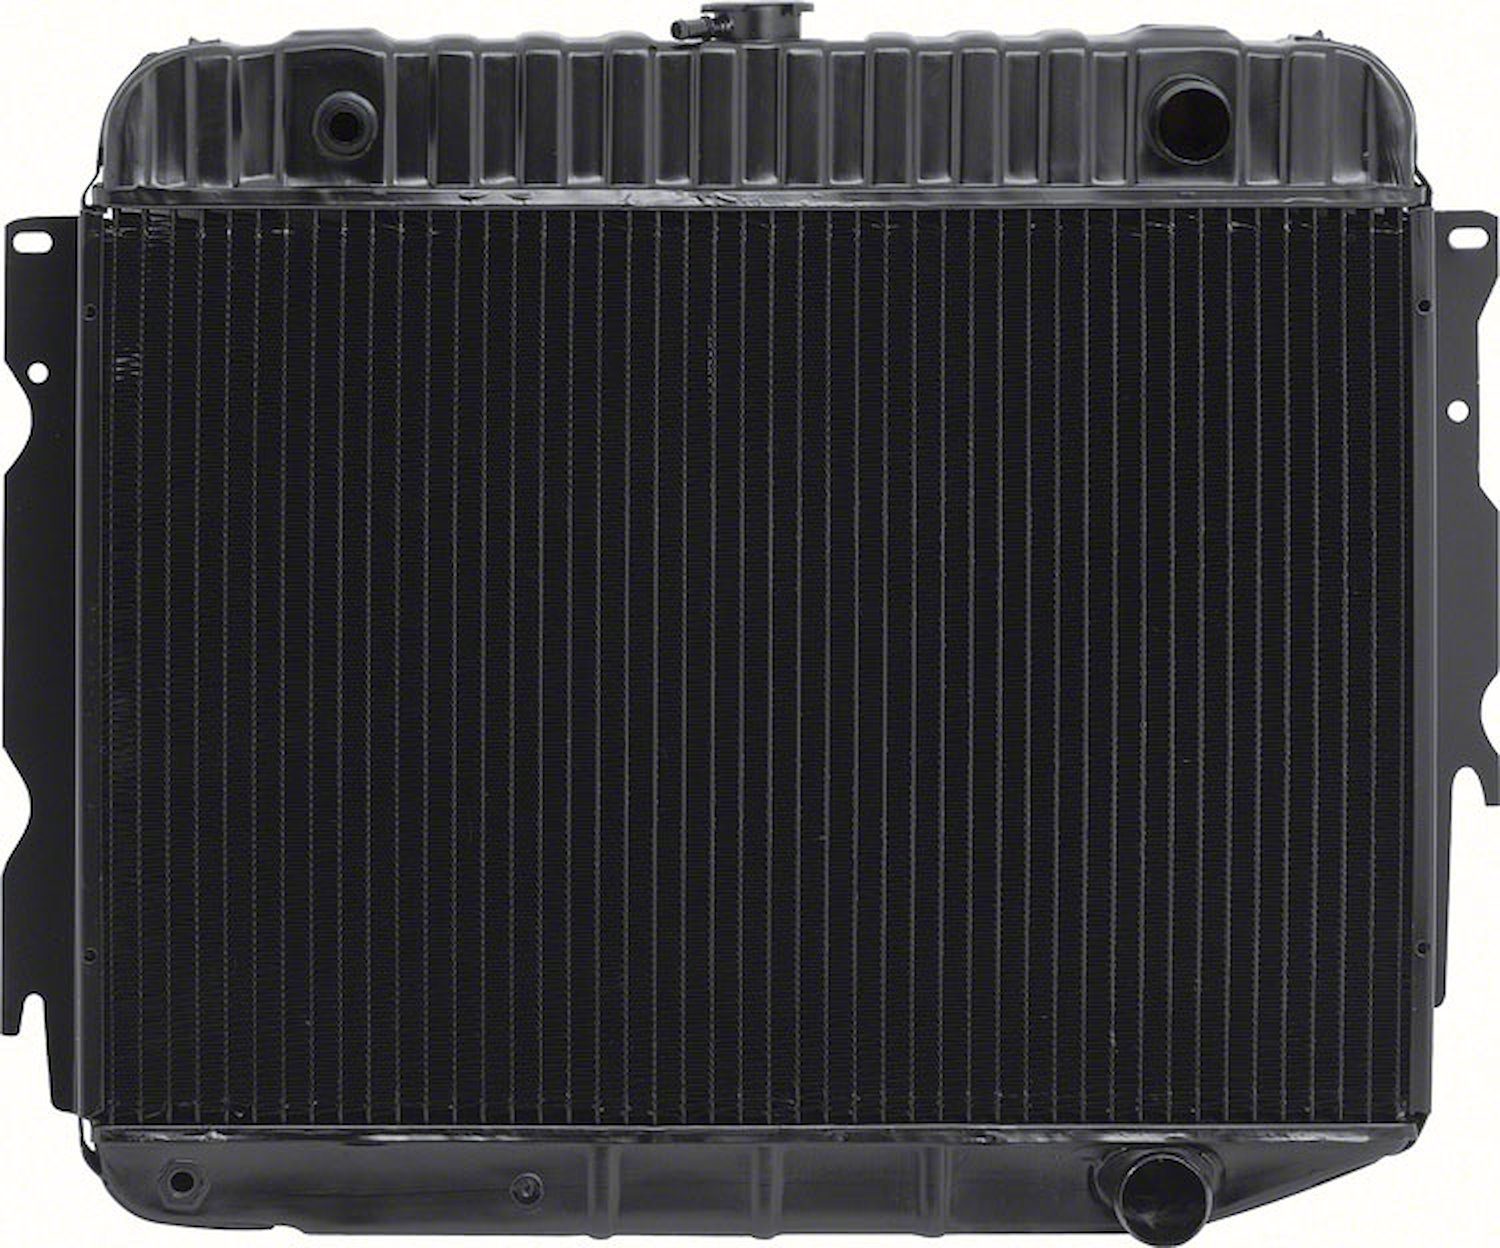 MD2302S Replacement Radiator 1973 Mopar B/E-Body Big Block V8 With Standard Trans 4 Row 26" Wide